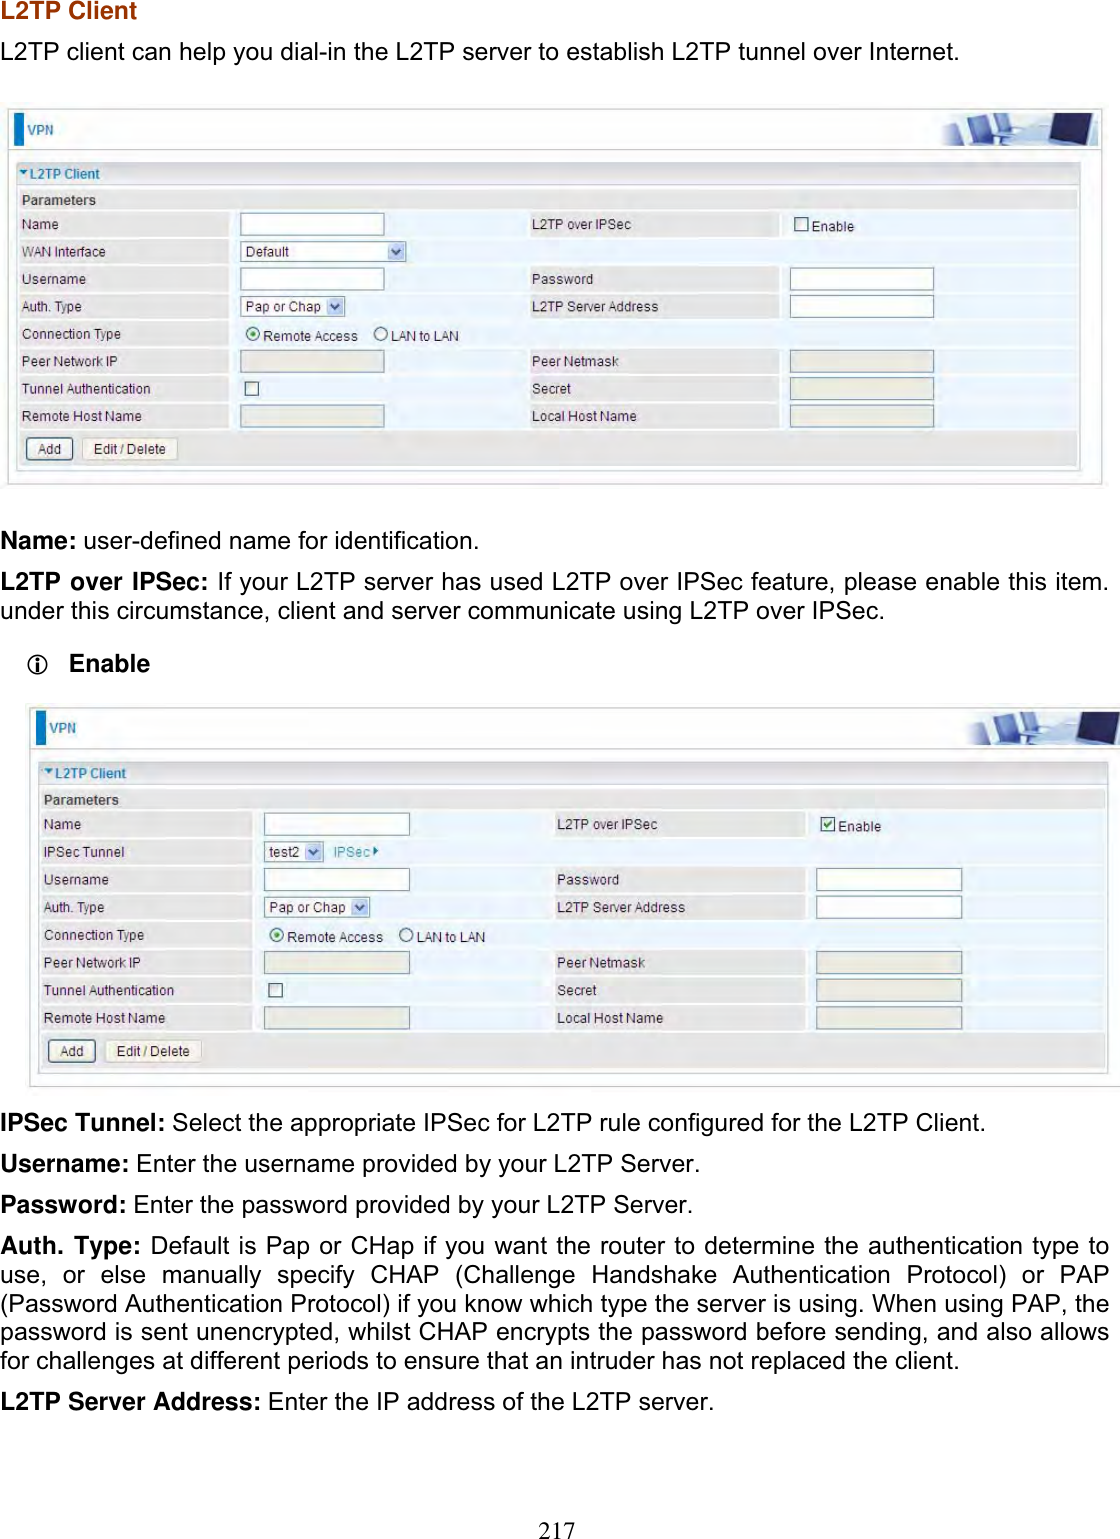 217L2TP Client L2TP client can help you dial-in the L2TP server to establish L2TP tunnel over Internet. Name: user-defined name for identification. L2TP over IPSec: If your L2TP server has used L2TP over IPSec feature, please enable this item. under this circumstance, client and server communicate using L2TP over IPSec. LEnableIPSec Tunnel: Select the appropriate IPSec for L2TP rule configured for the L2TP Client.Username: Enter the username provided by your L2TP Server. Password: Enter the password provided by your L2TP Server.Auth. Type: Default is Pap or CHap if you want the router to determine the authentication type to use, or else manually specify CHAP (Challenge Handshake Authentication Protocol) or PAP (Password Authentication Protocol) if you know which type the server is using. When using PAP, the password is sent unencrypted, whilst CHAP encrypts the password before sending, and also allows for challenges at different periods to ensure that an intruder has not replaced the client. L2TP Server Address: Enter the IP address of the L2TP server. 